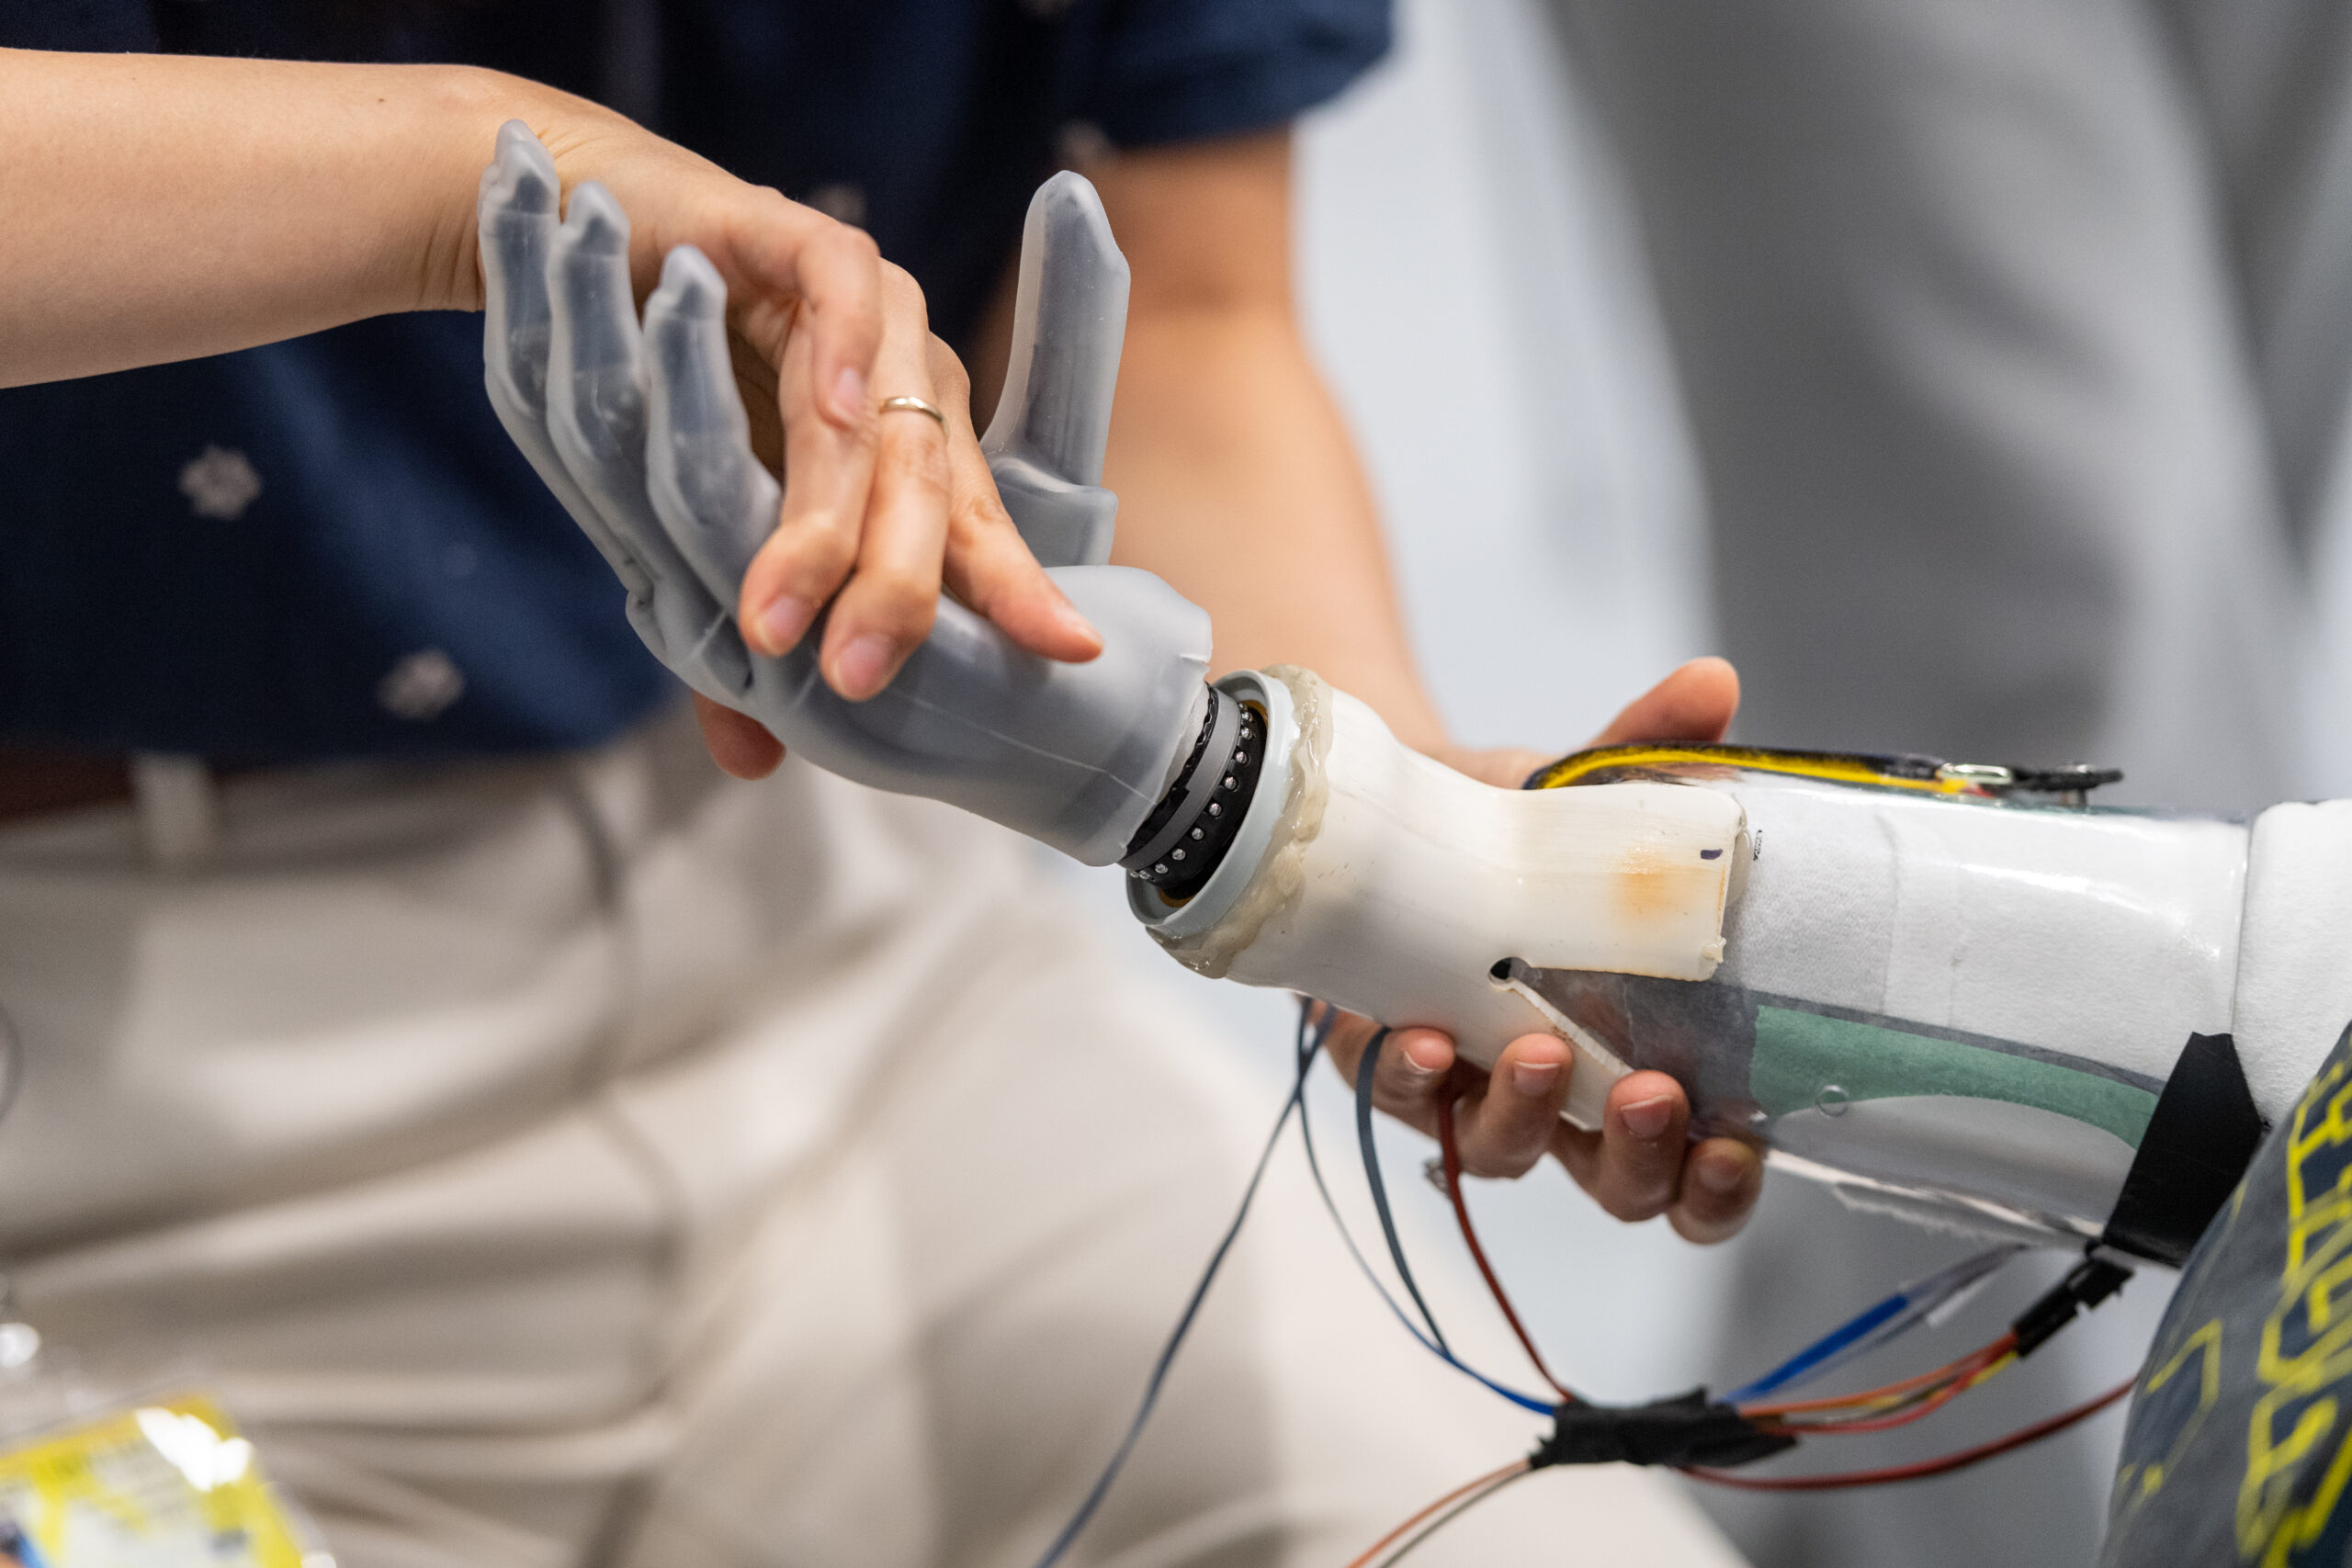 Kinesiology student tests grip of prosthetic arm